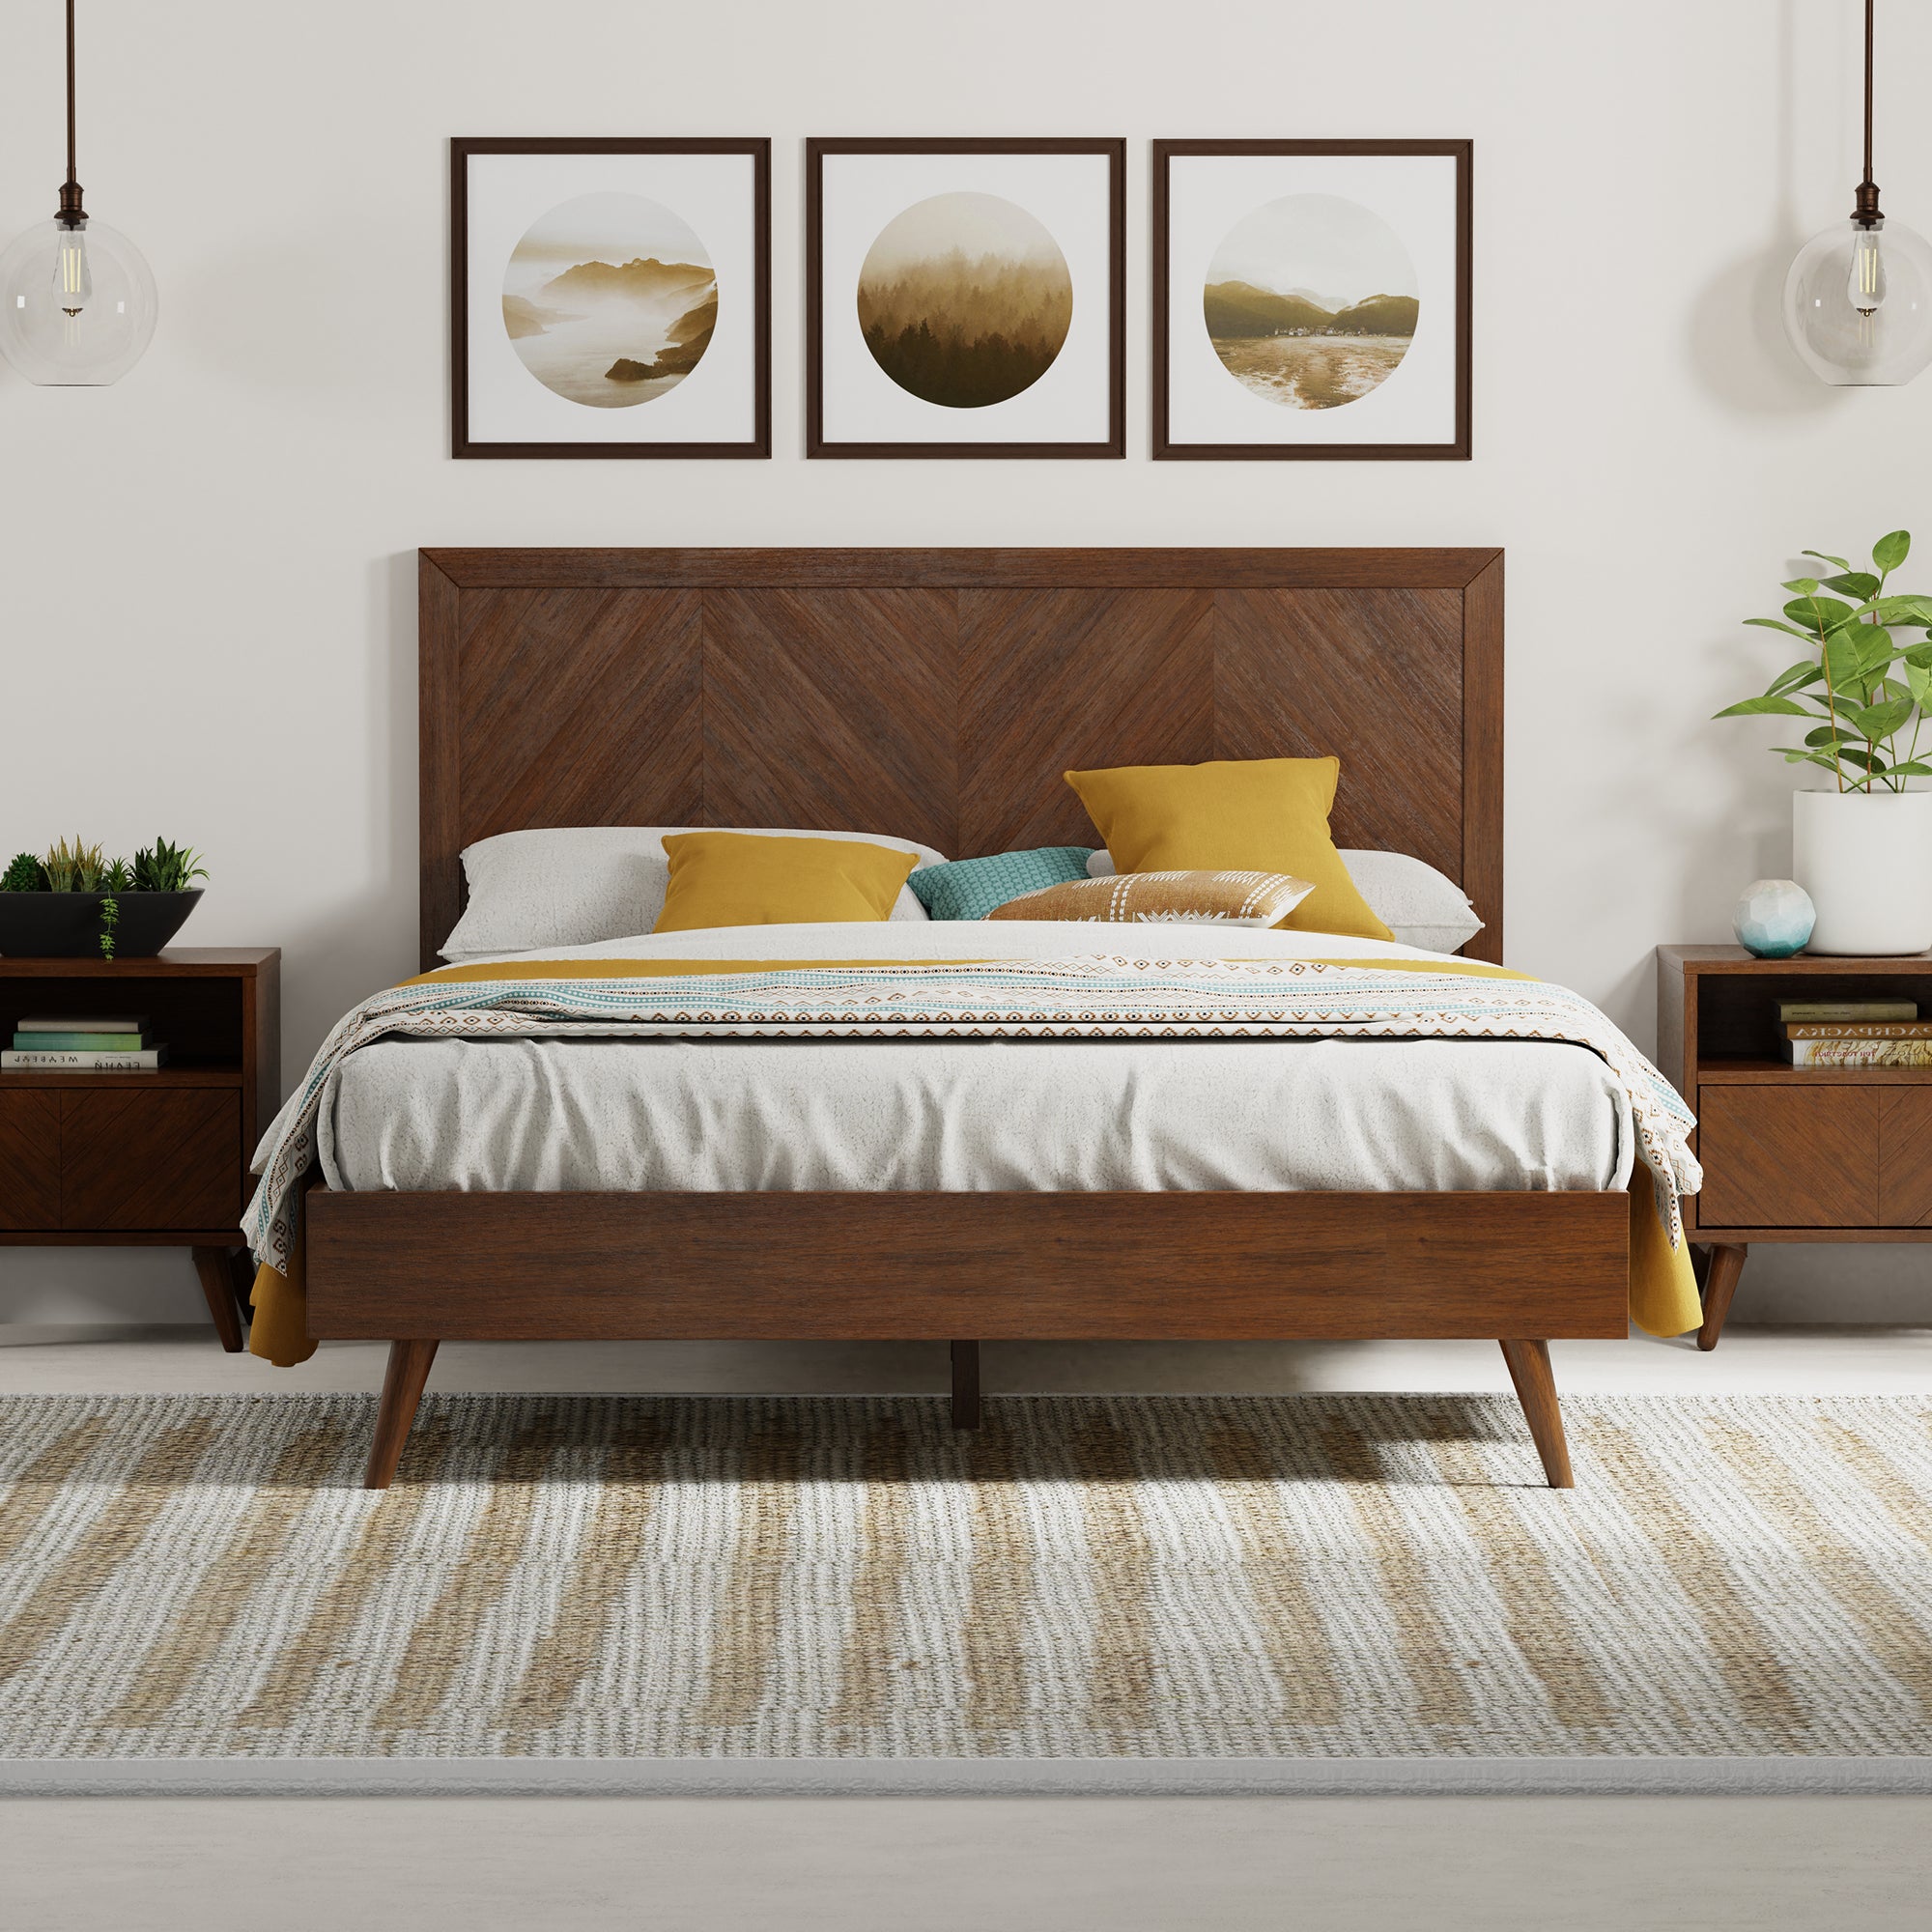 Chevron Wood Bed Frame with Headboard